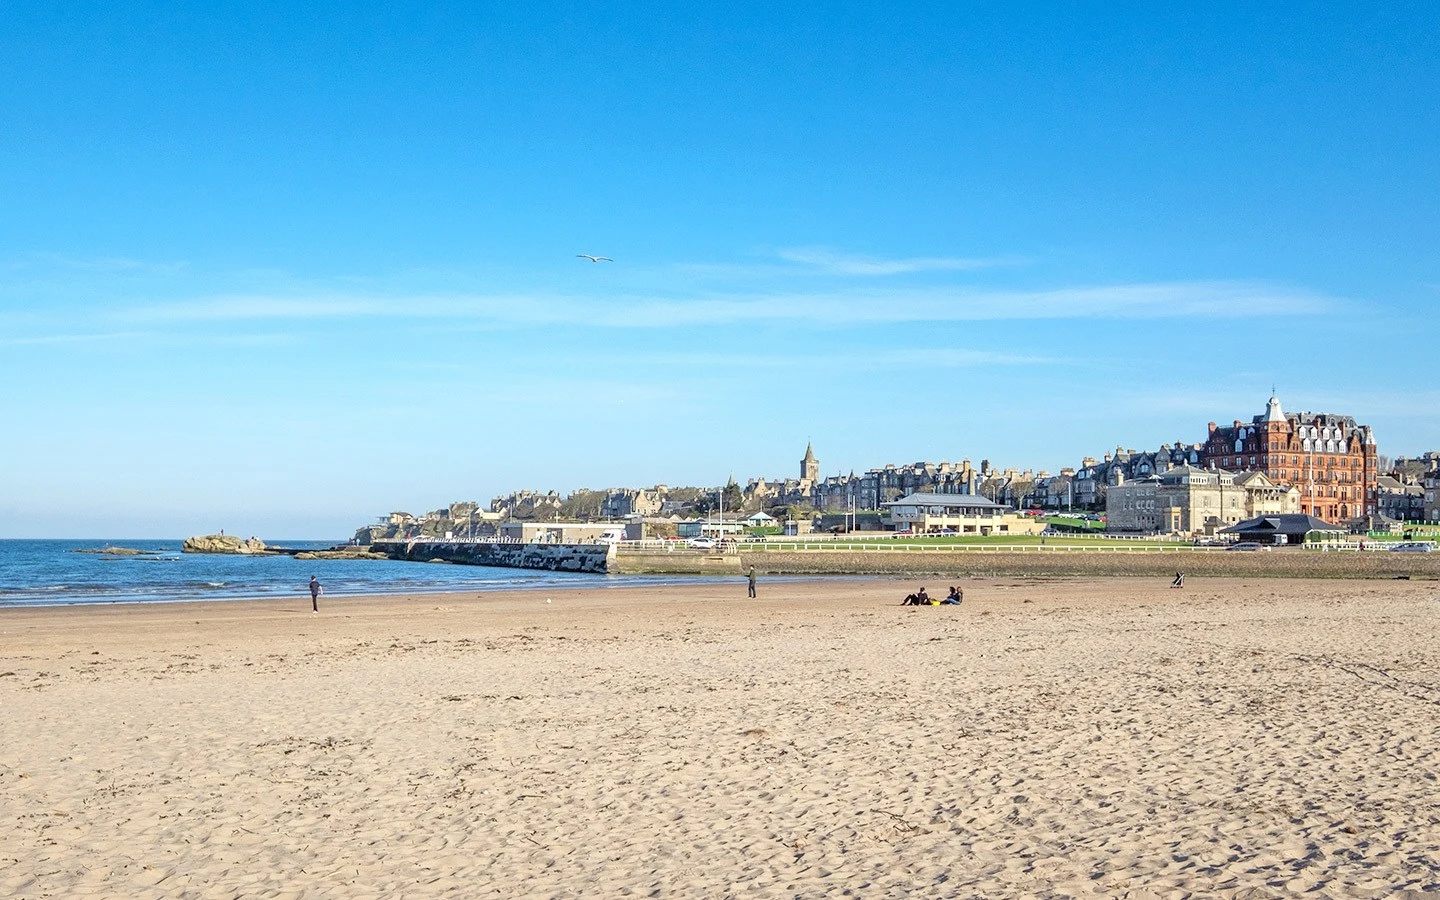 West Sands Beach in St Andrews Scotland on a day trip from Edinburgh